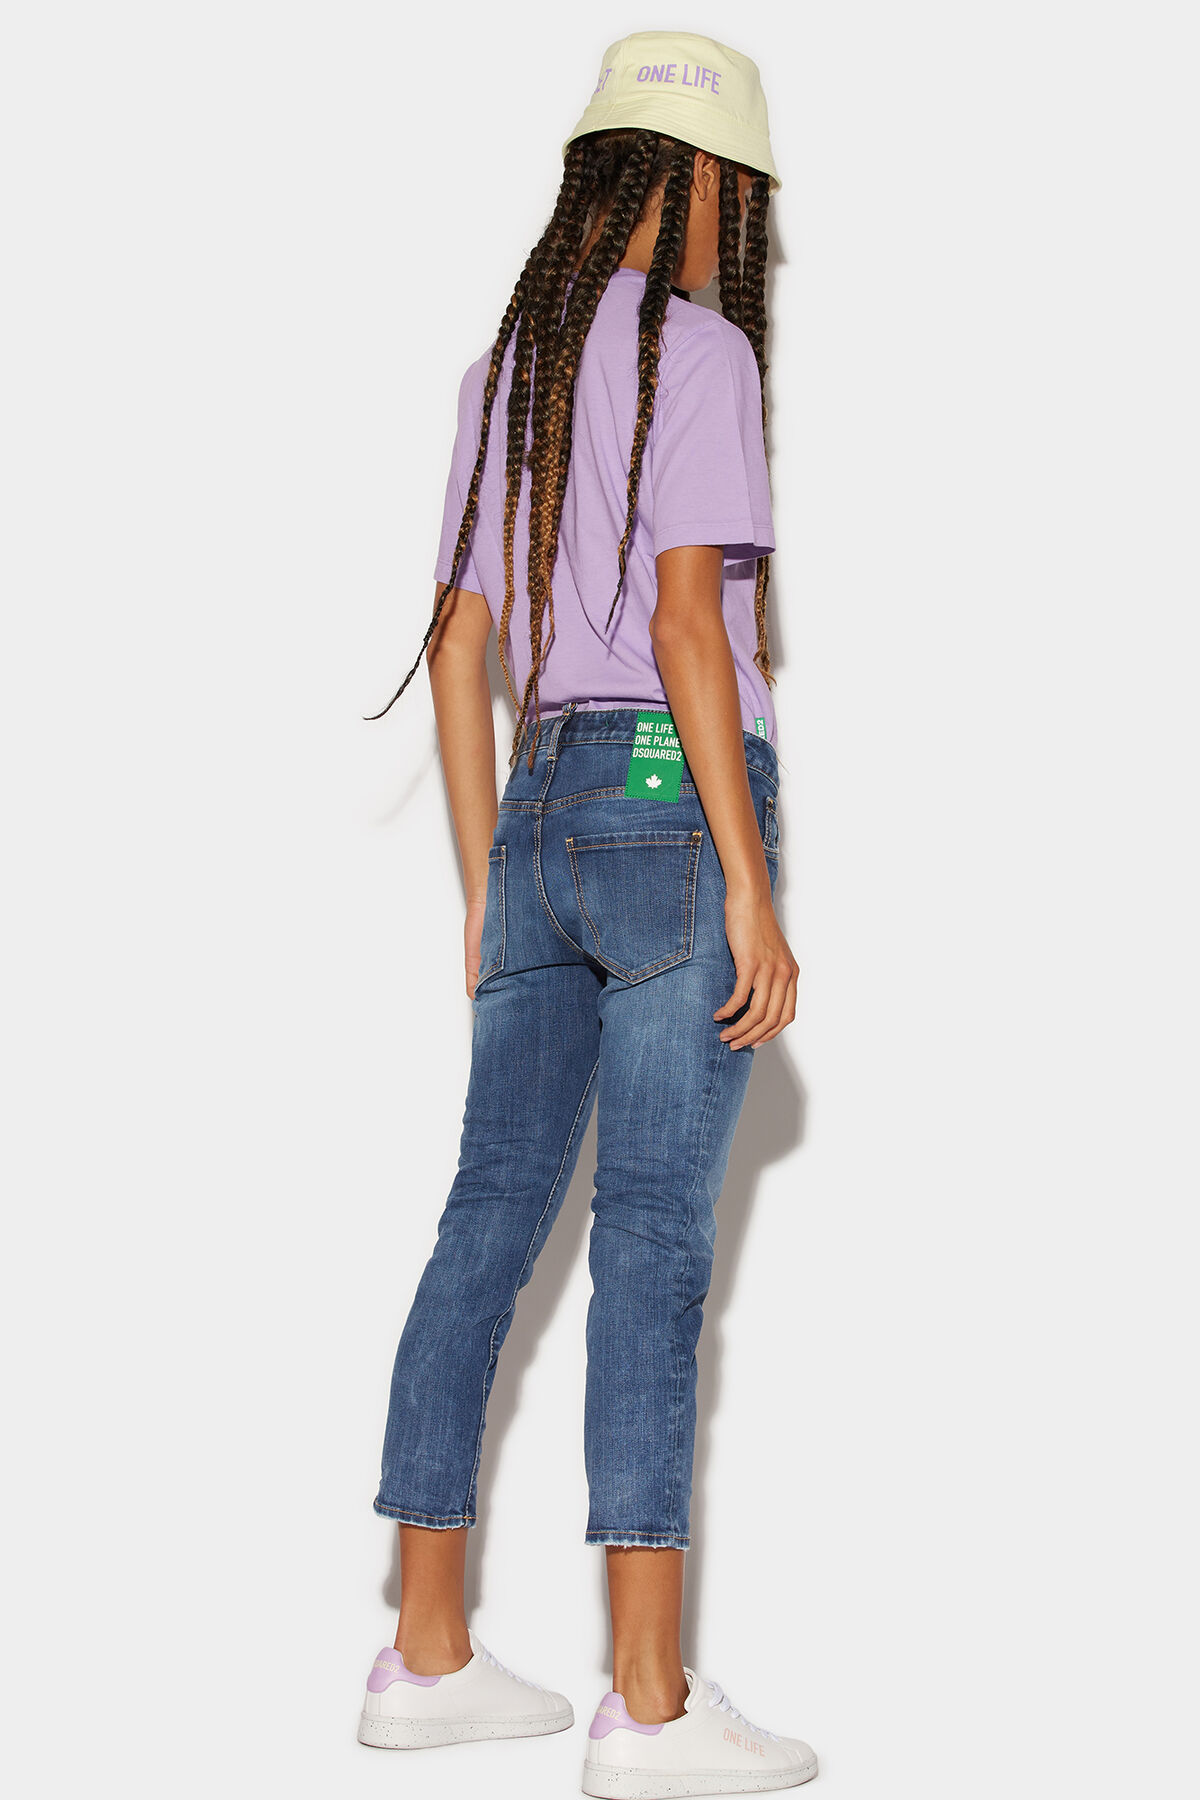 DSQUARED2 Jeans Cool Girl Cropped Green Label in Washed Blue